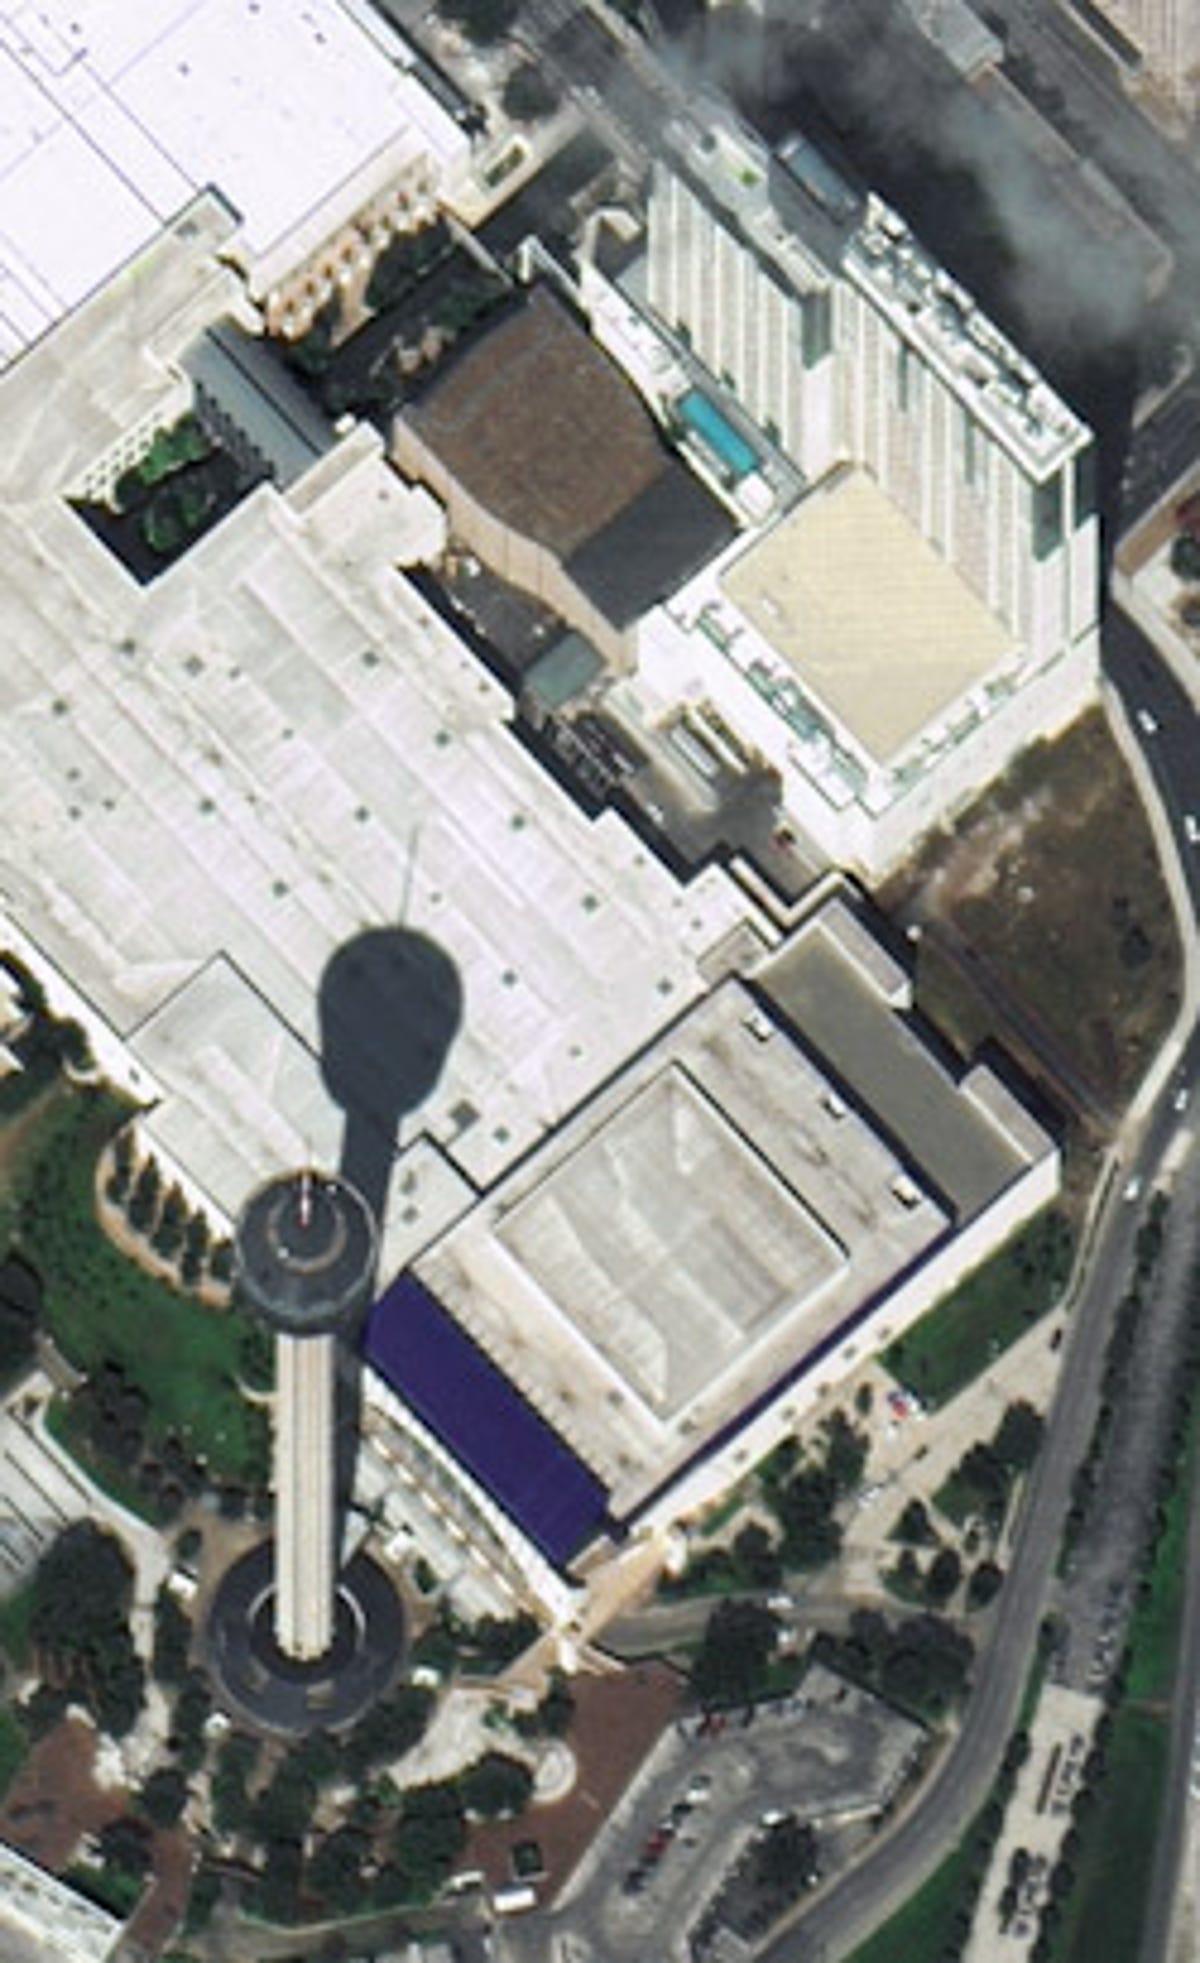 The Henry B. Gonzalez Convention Center San Antonio, Texas, where DigitalGlobe is showing off its first images for the GeoInt 2009 conference.